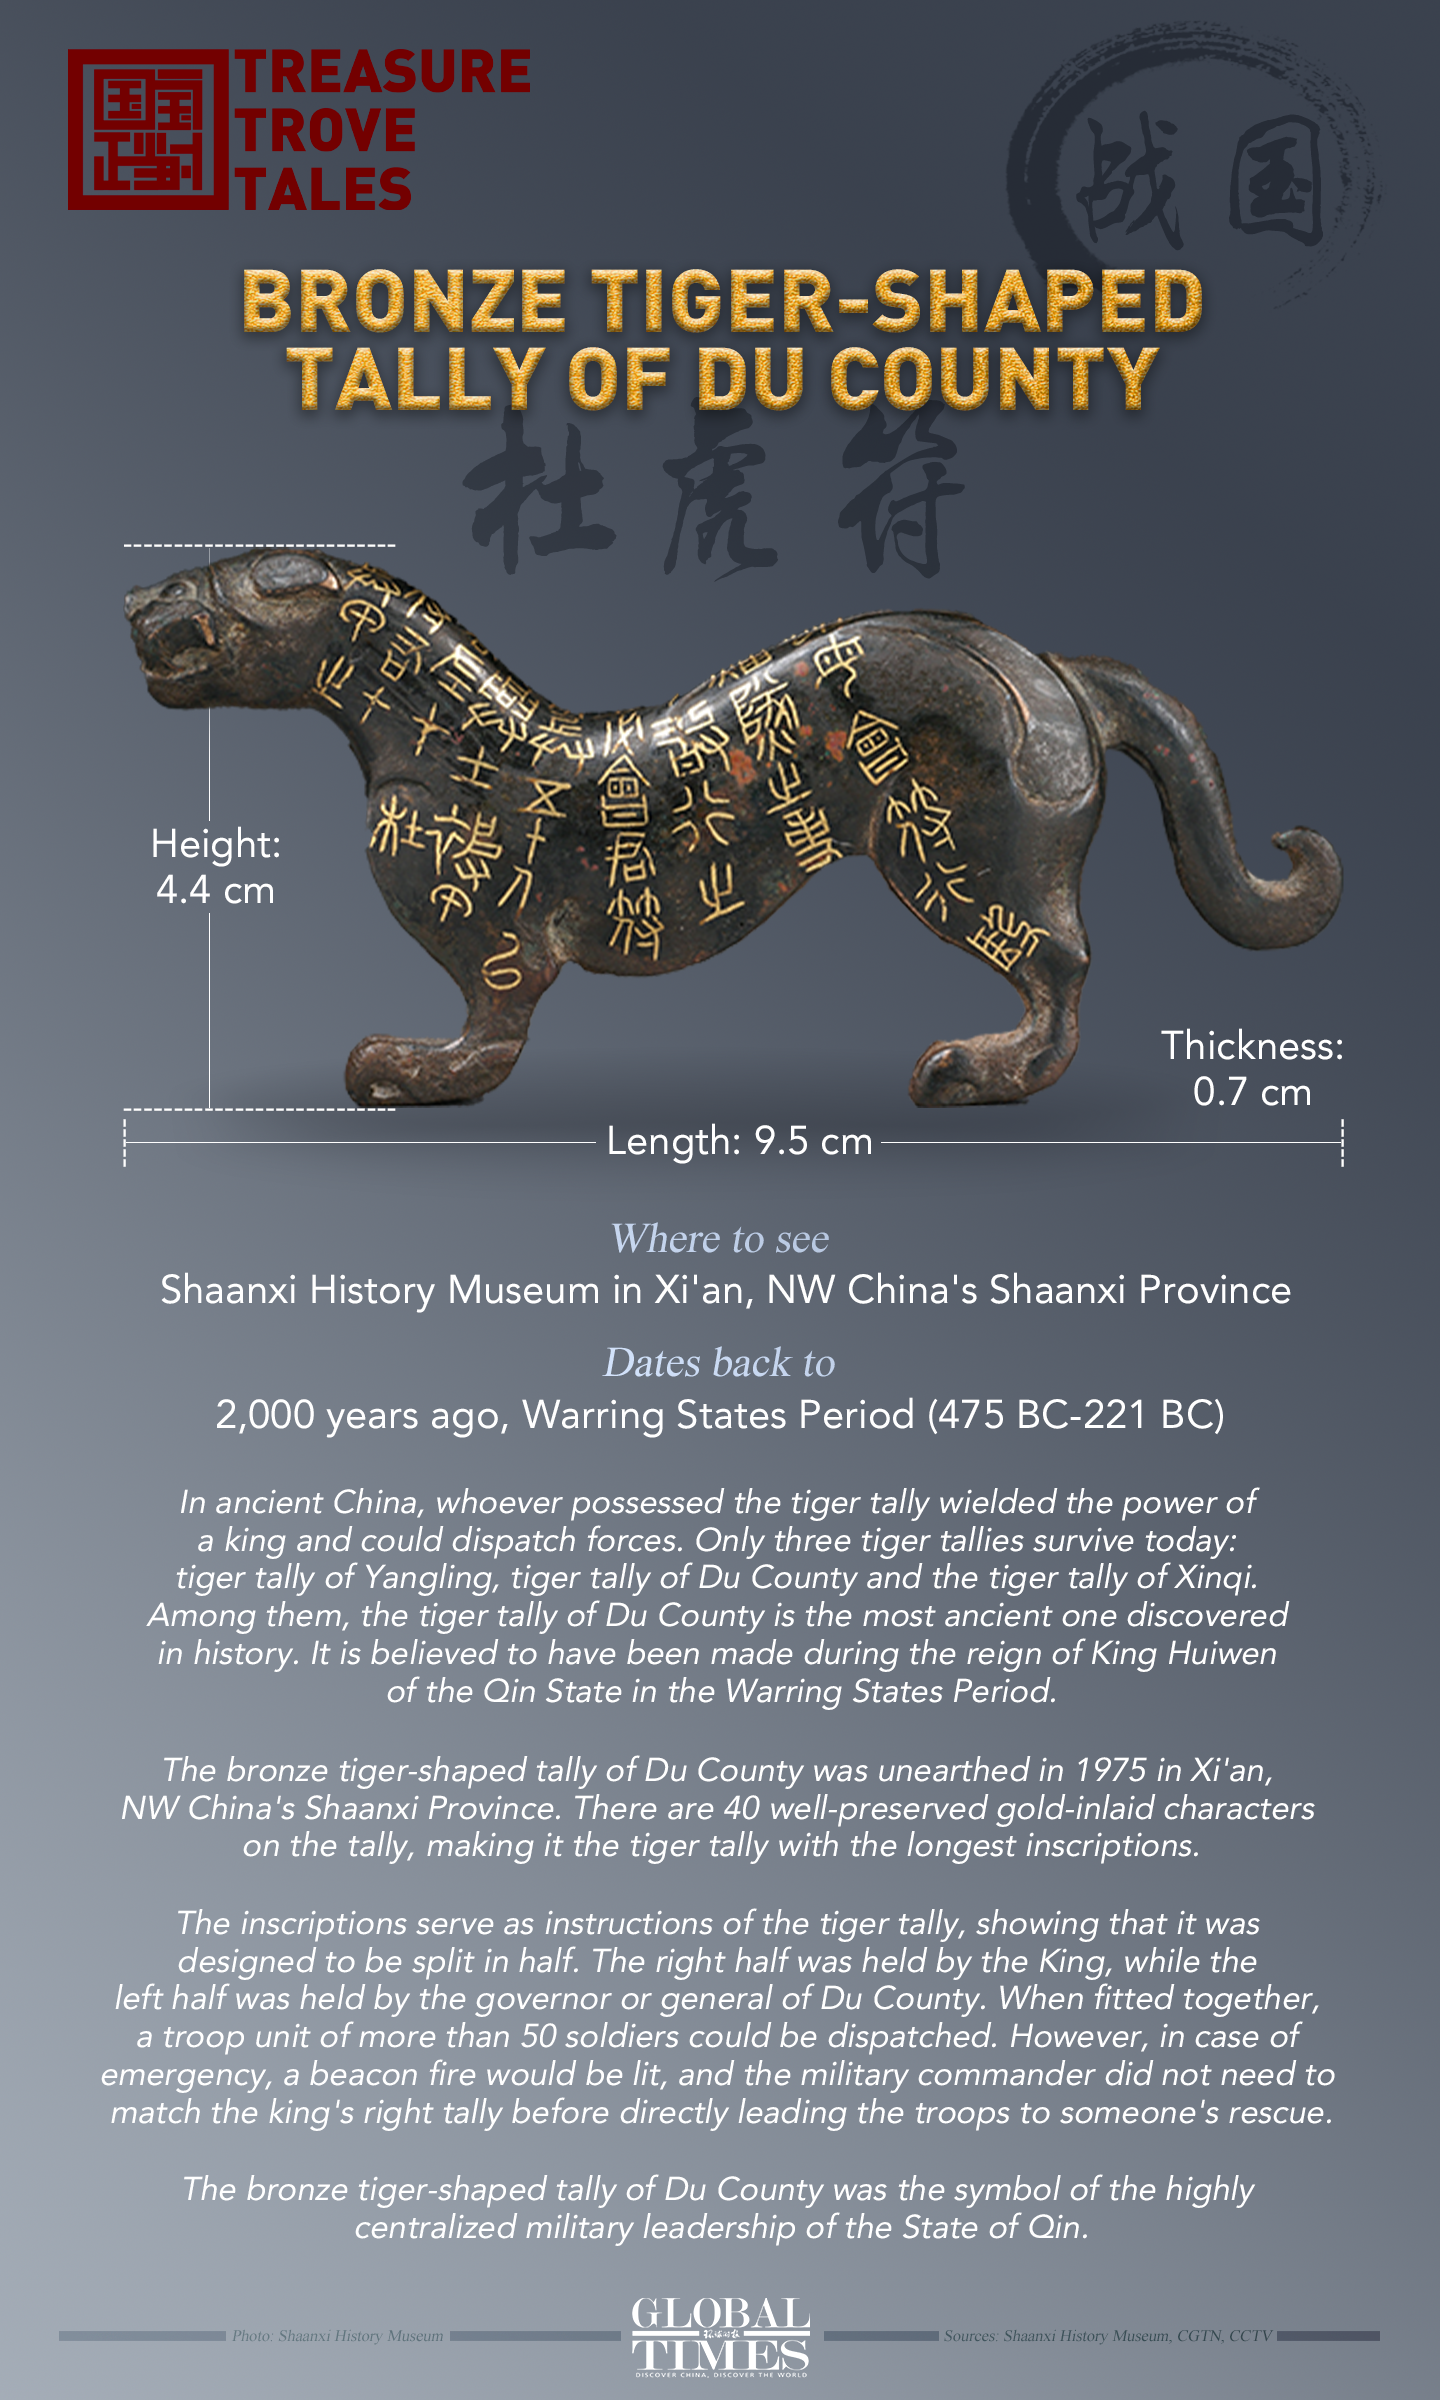 Treasure Trove Tales: Bronze Tiger-shaped Tally of Du County. Graphic: GT